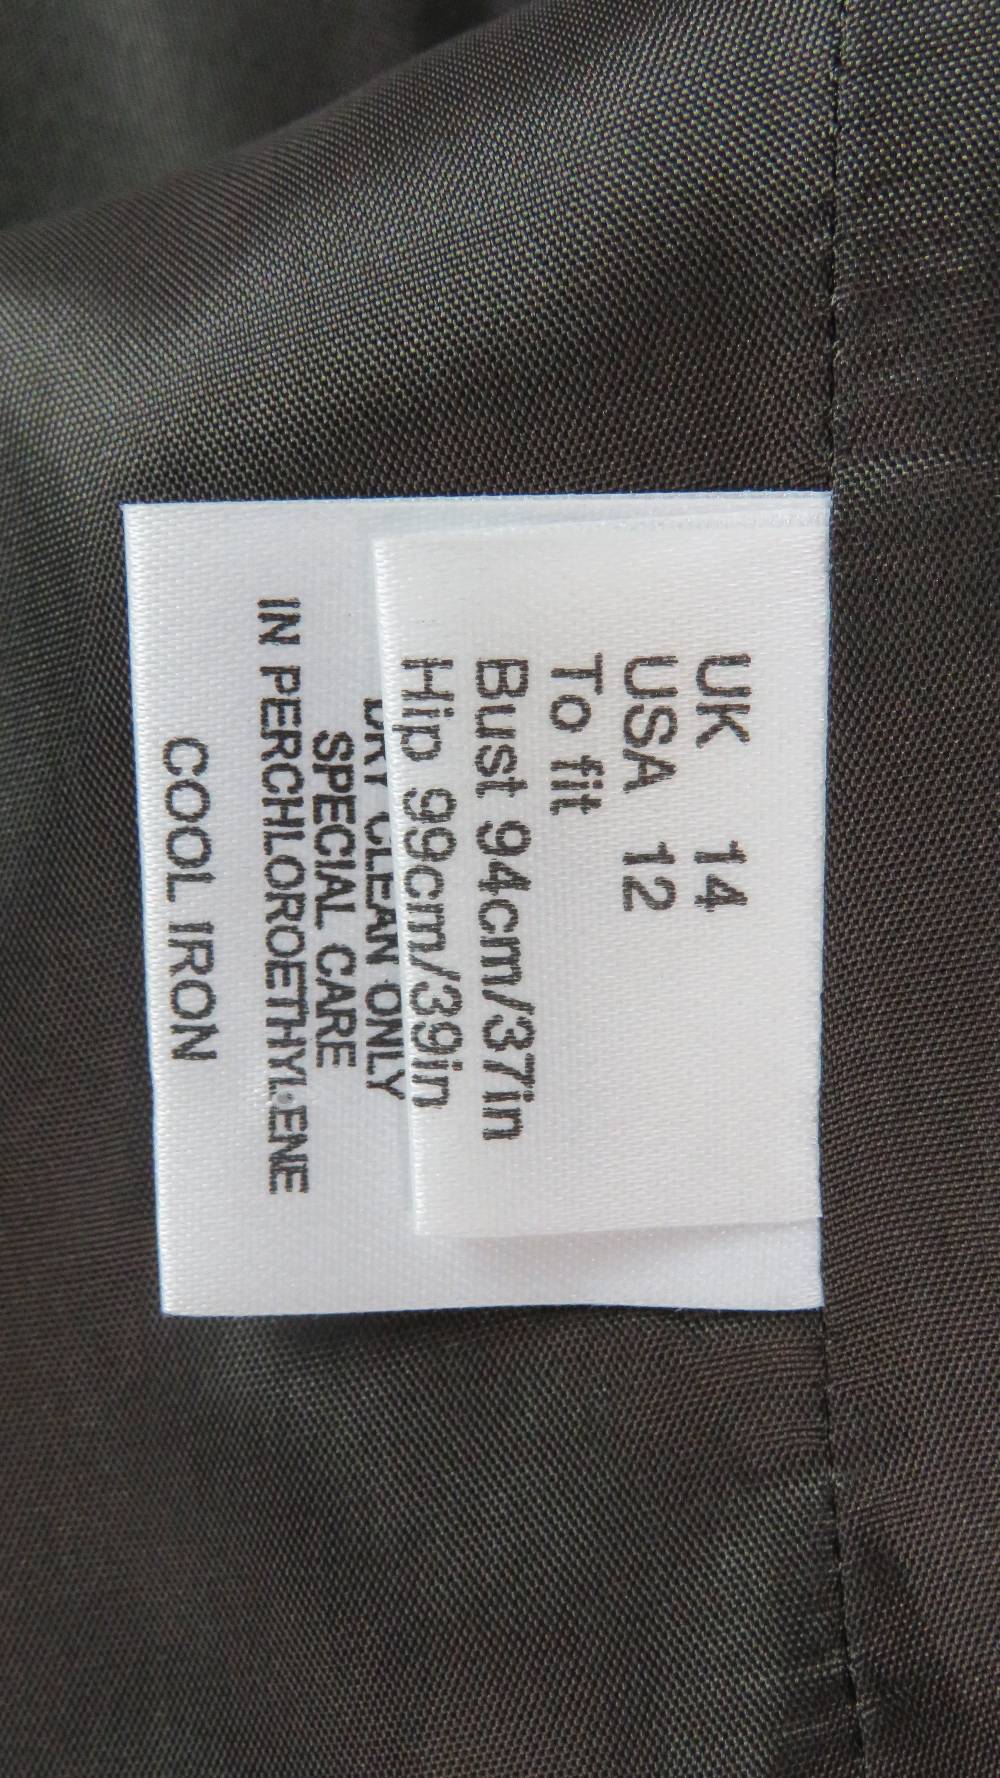 Jaeger; A black velvet and 'gold brocade' jacket, dry clean only label within, UK size 14. - Image 5 of 7